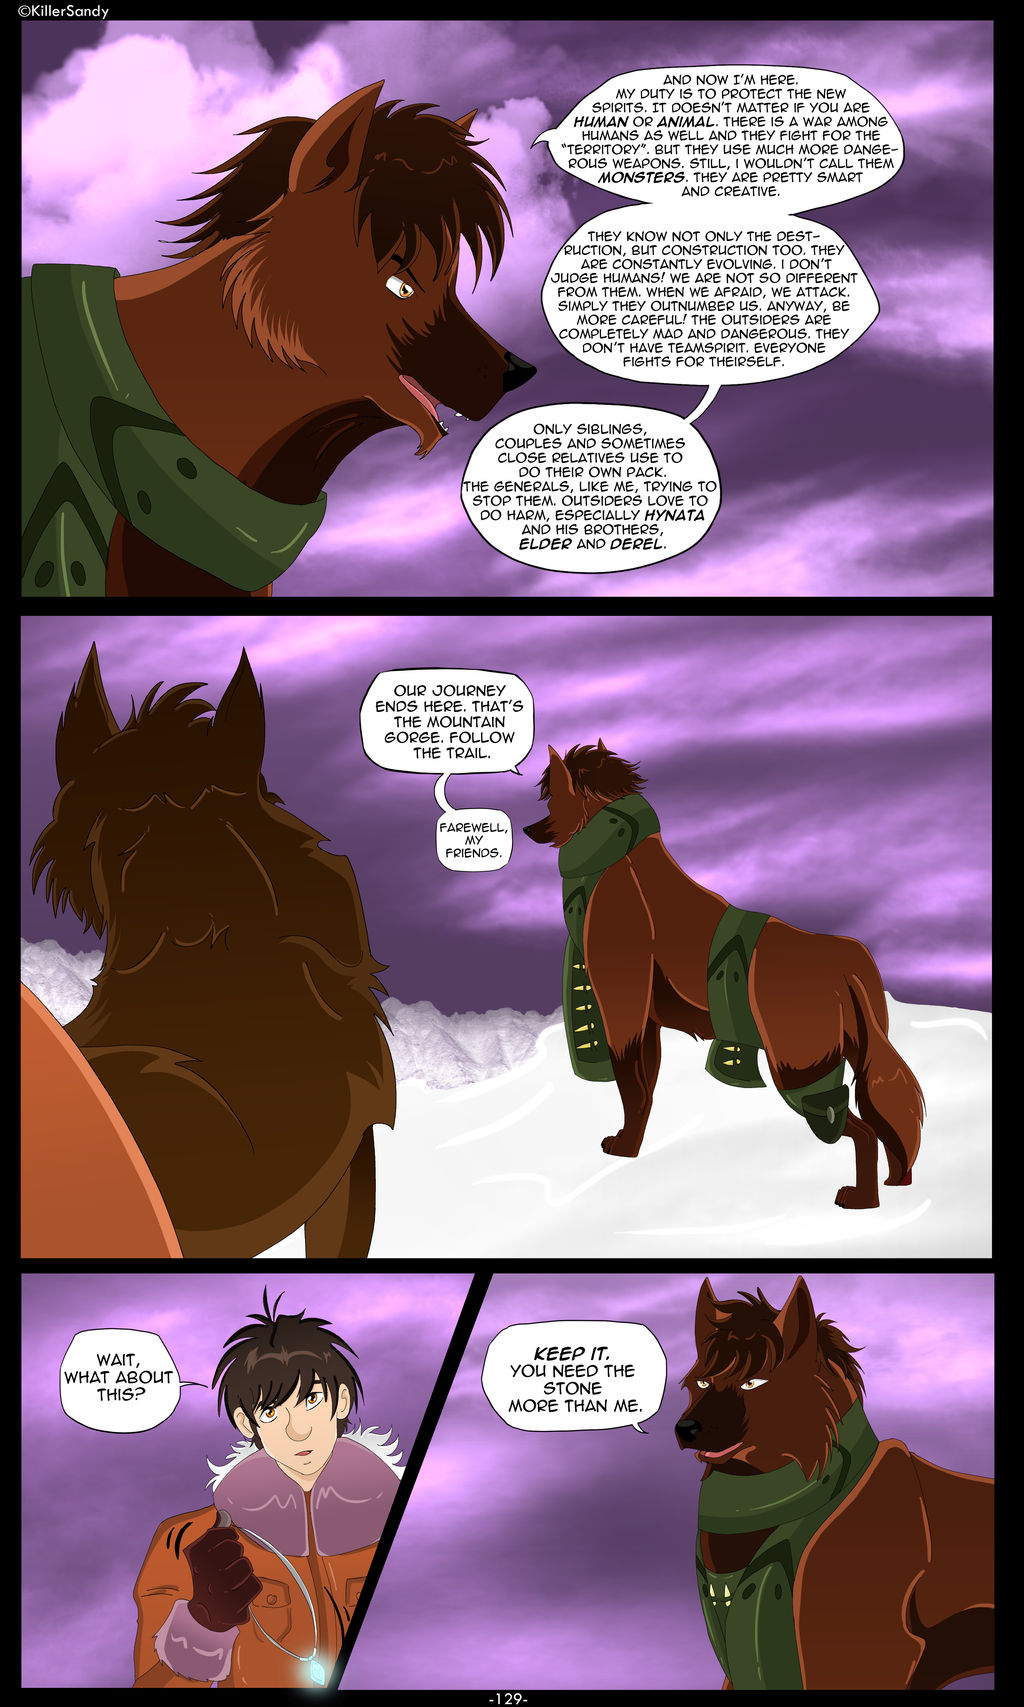 The Prince of the Moonlight Stone page 129